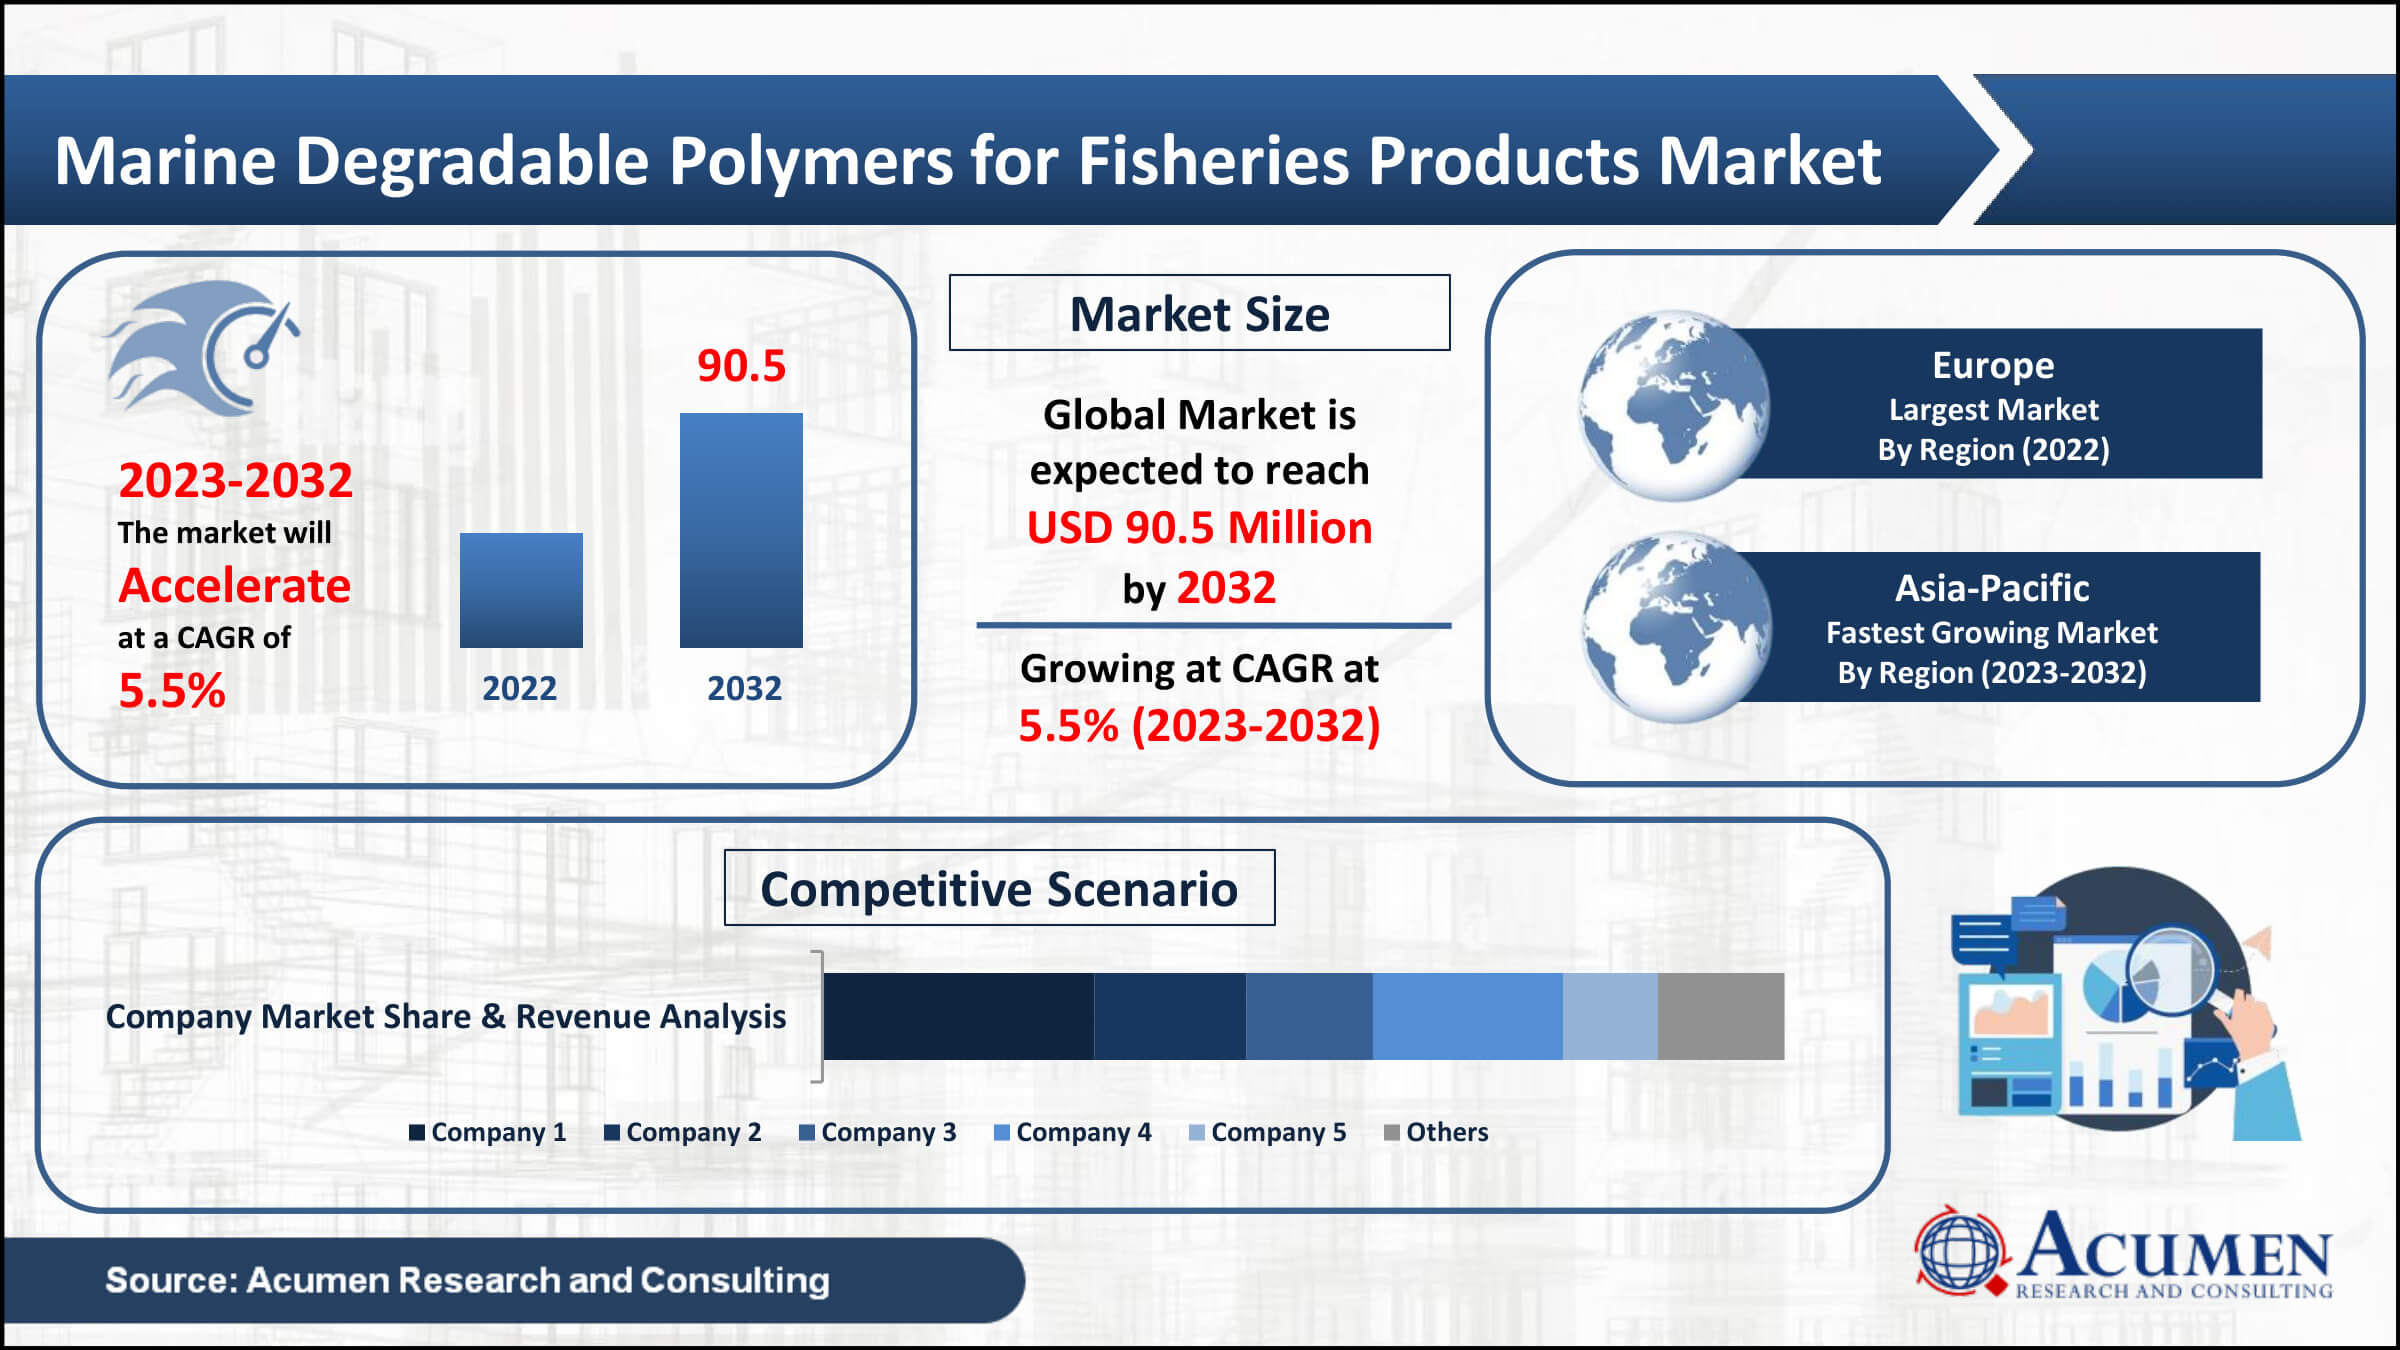 Marine Degradable Polymers for Fisheries Products Market Analysis